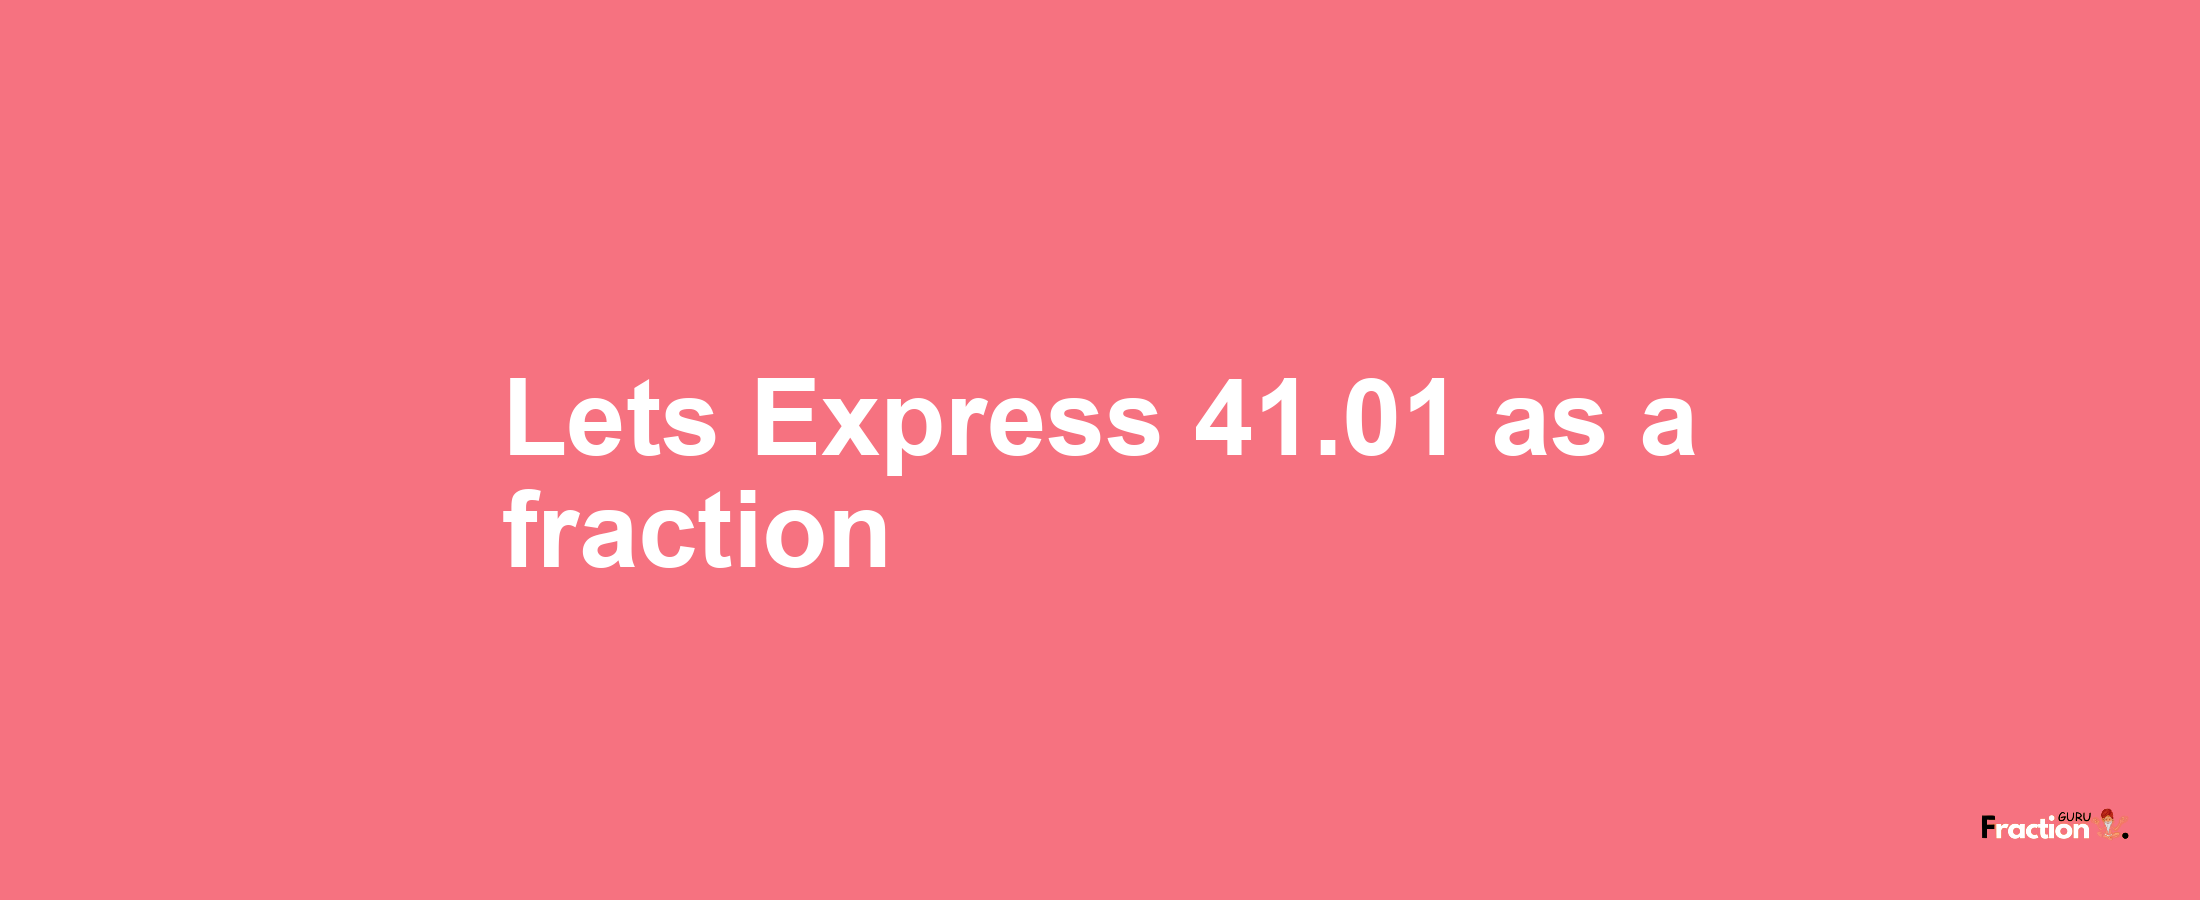 Lets Express 41.01 as afraction